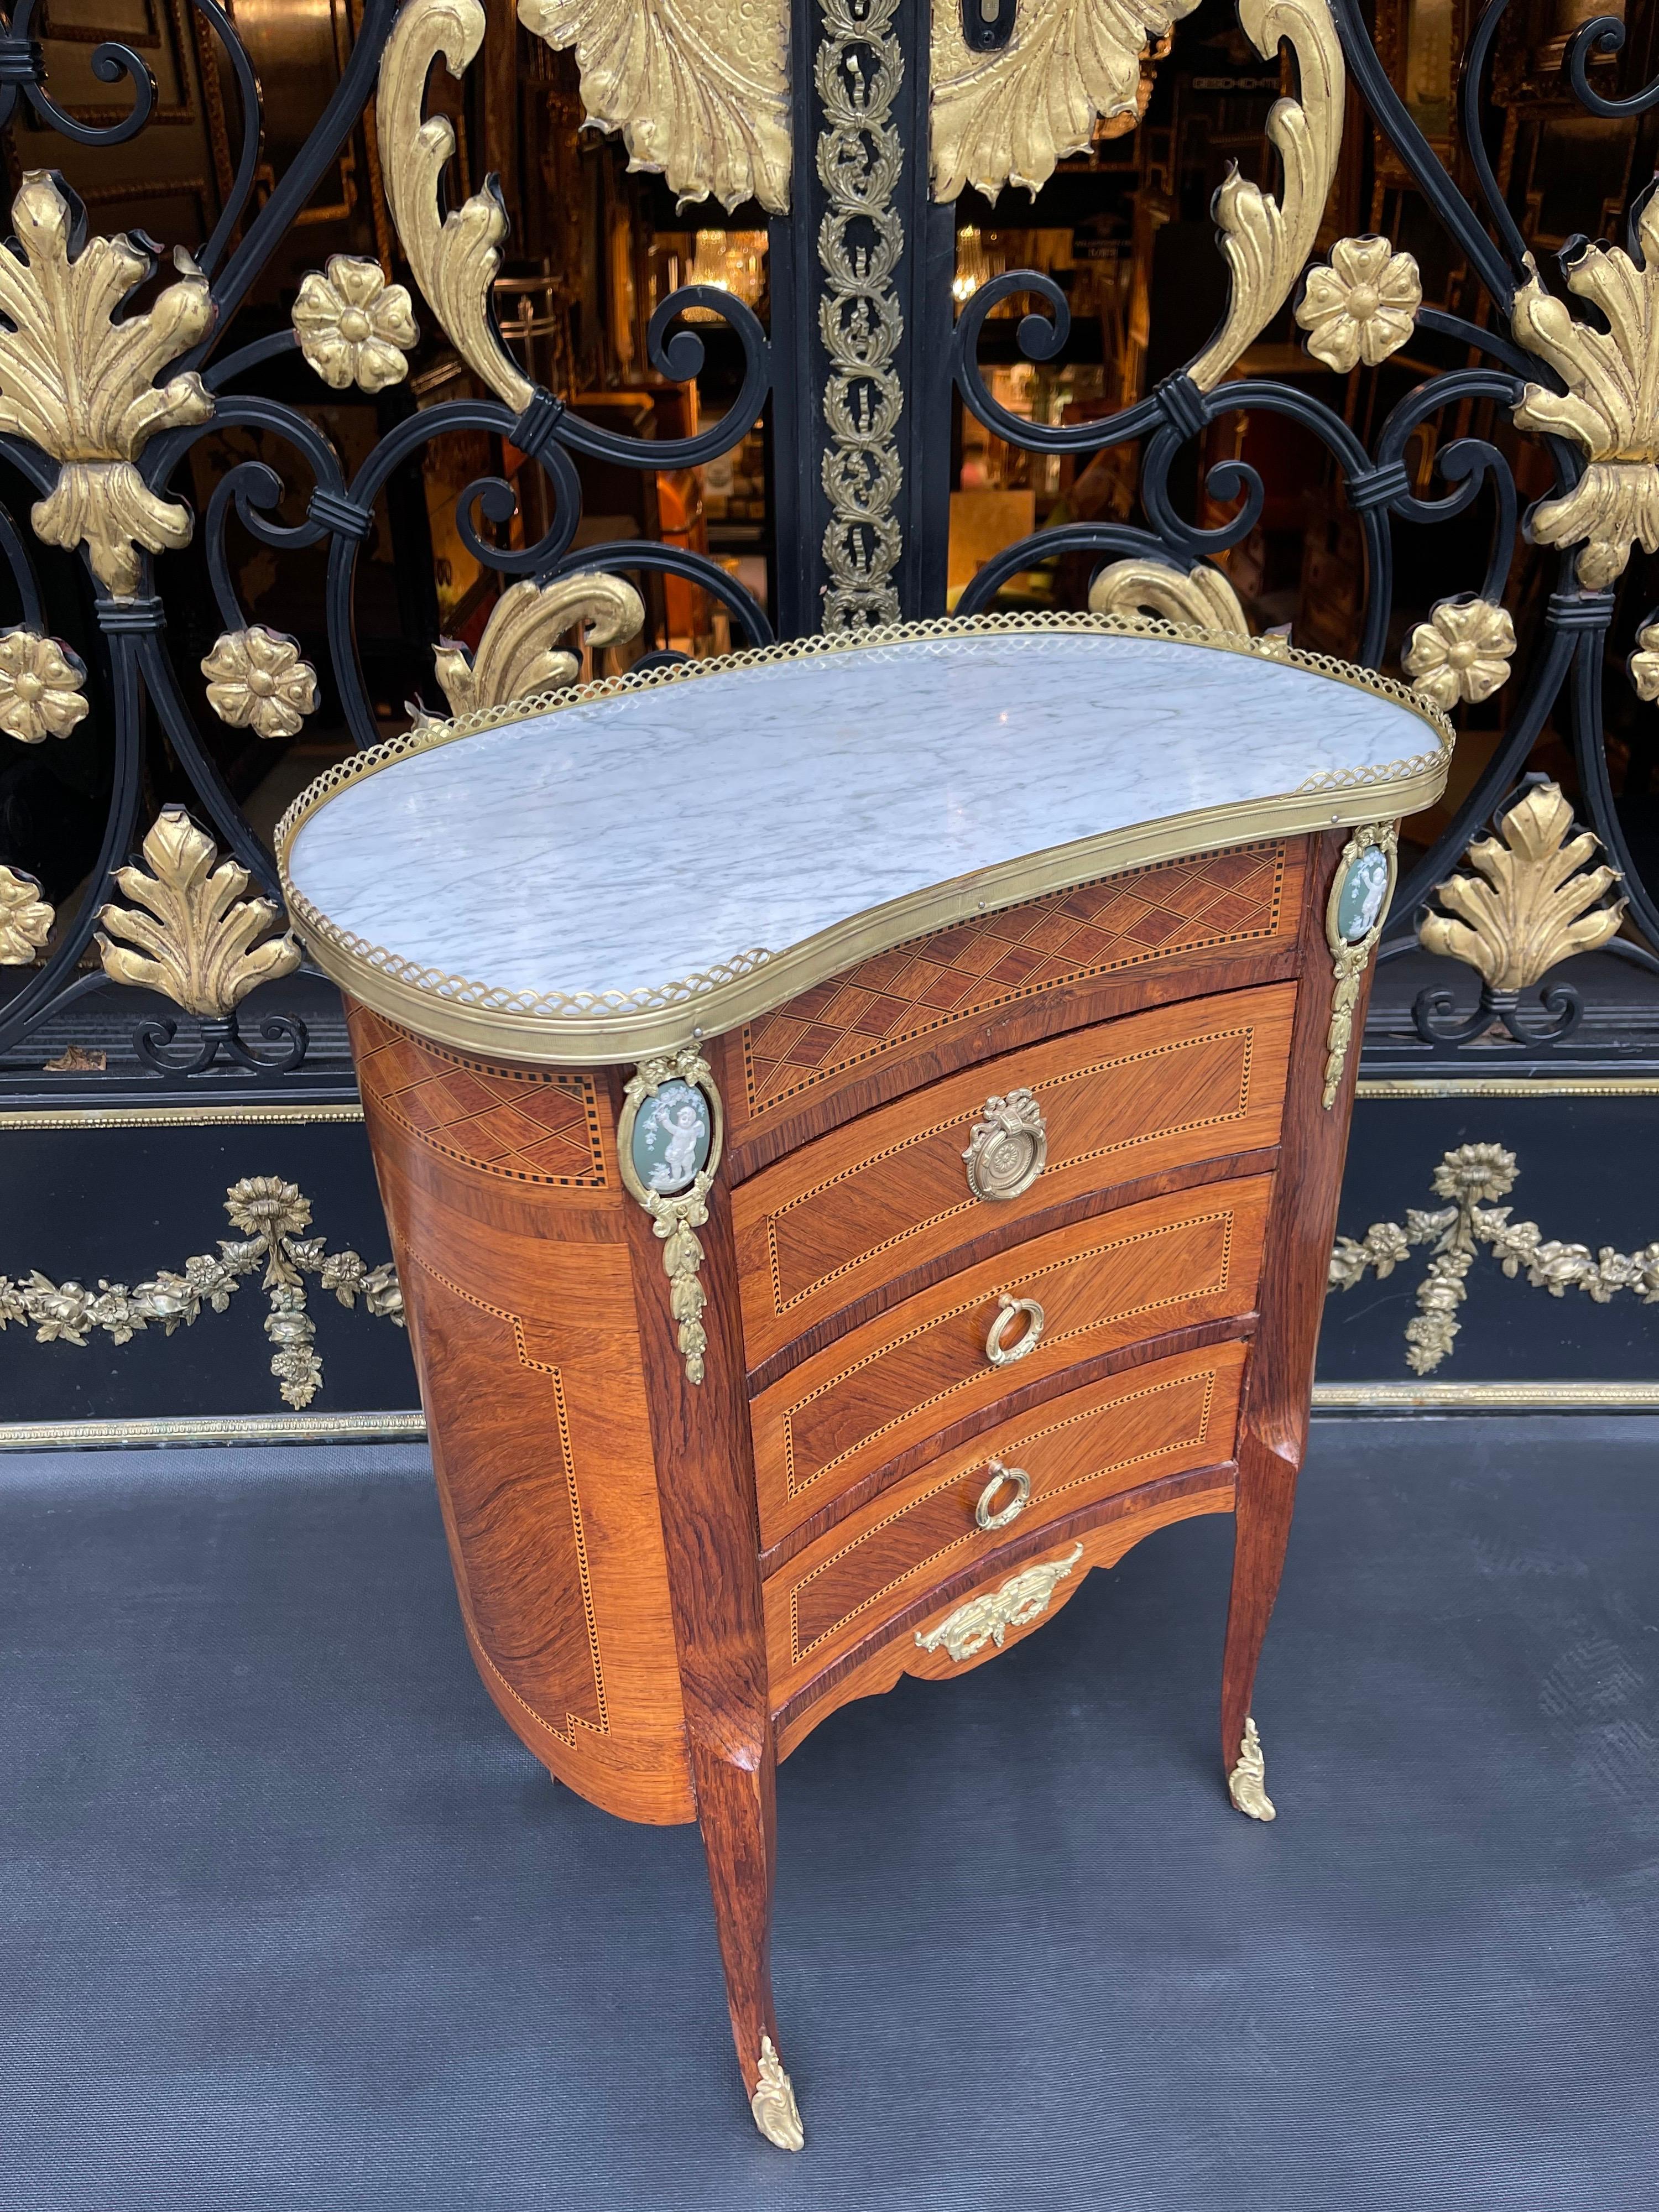 French 19th Century Royal Side Table, Paris, Fire-Gilded, Louis XV